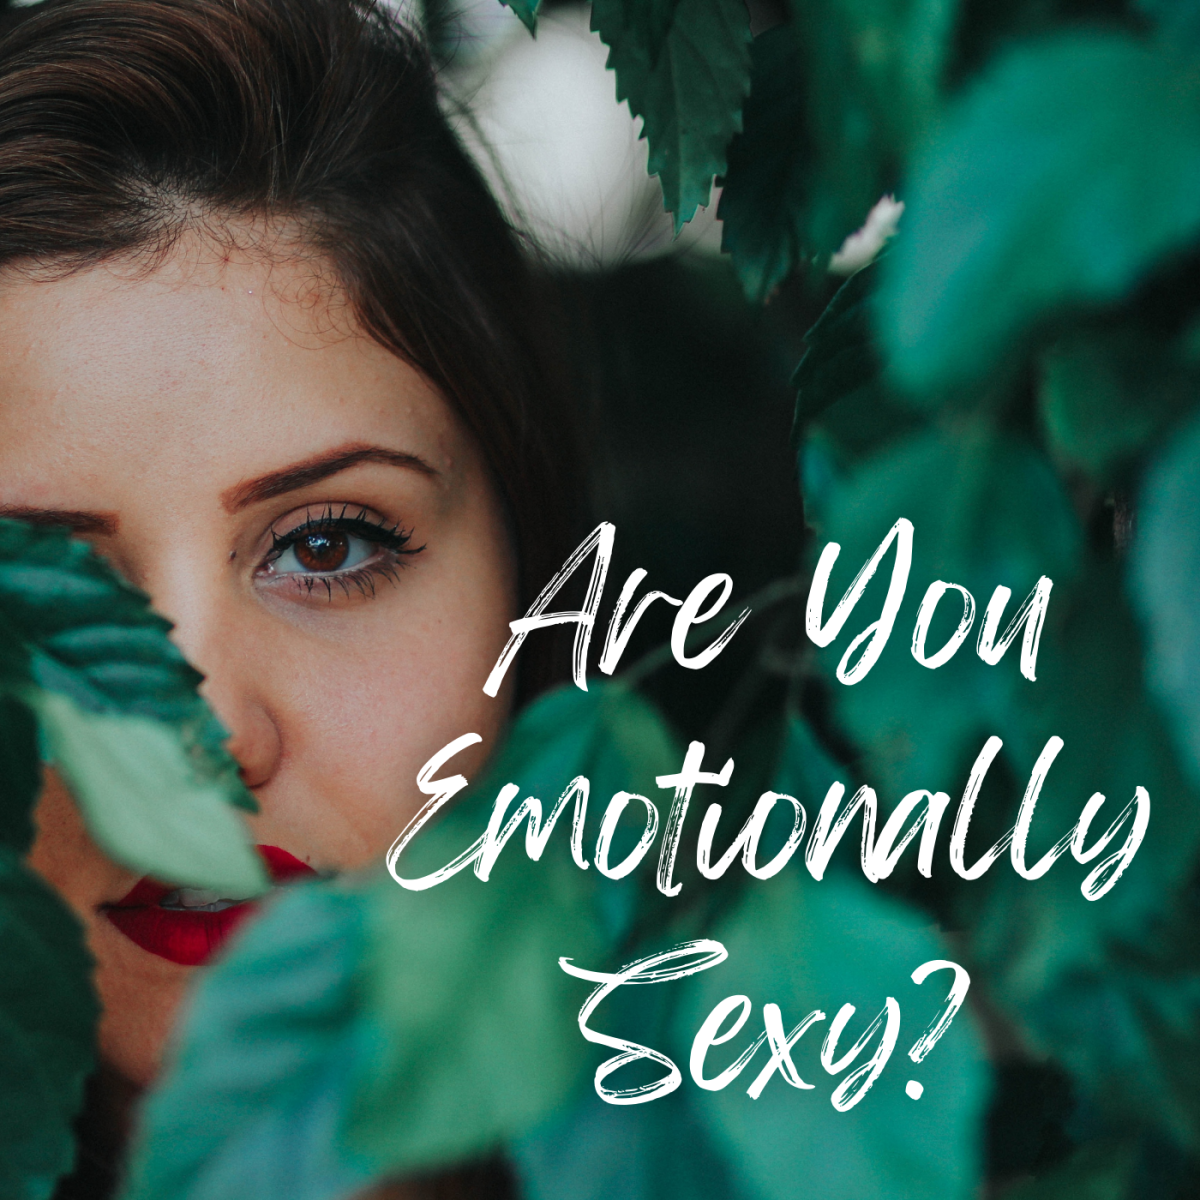 Emotional attractiveness is the key to self-fulfillment and success.